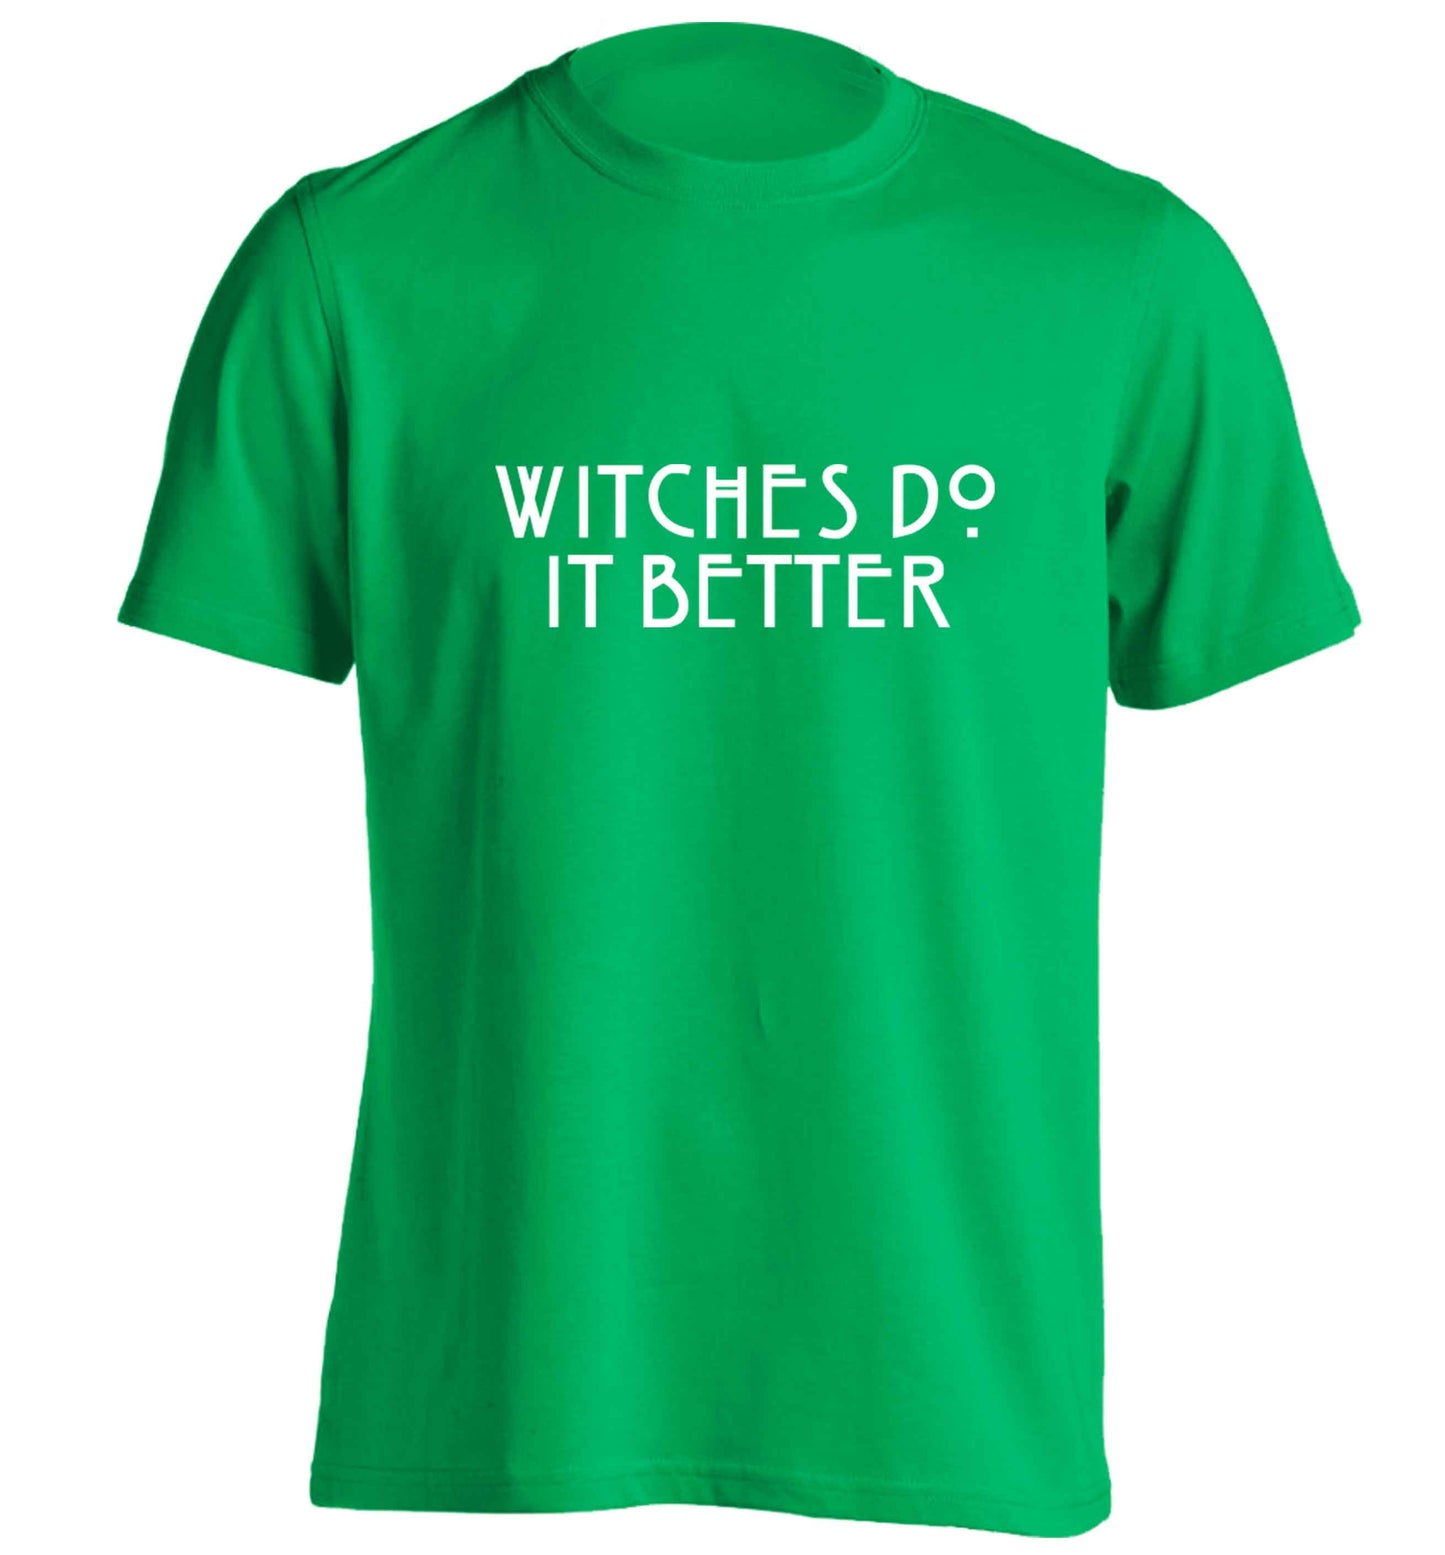 Witches do it better adults unisex green Tshirt 2XL